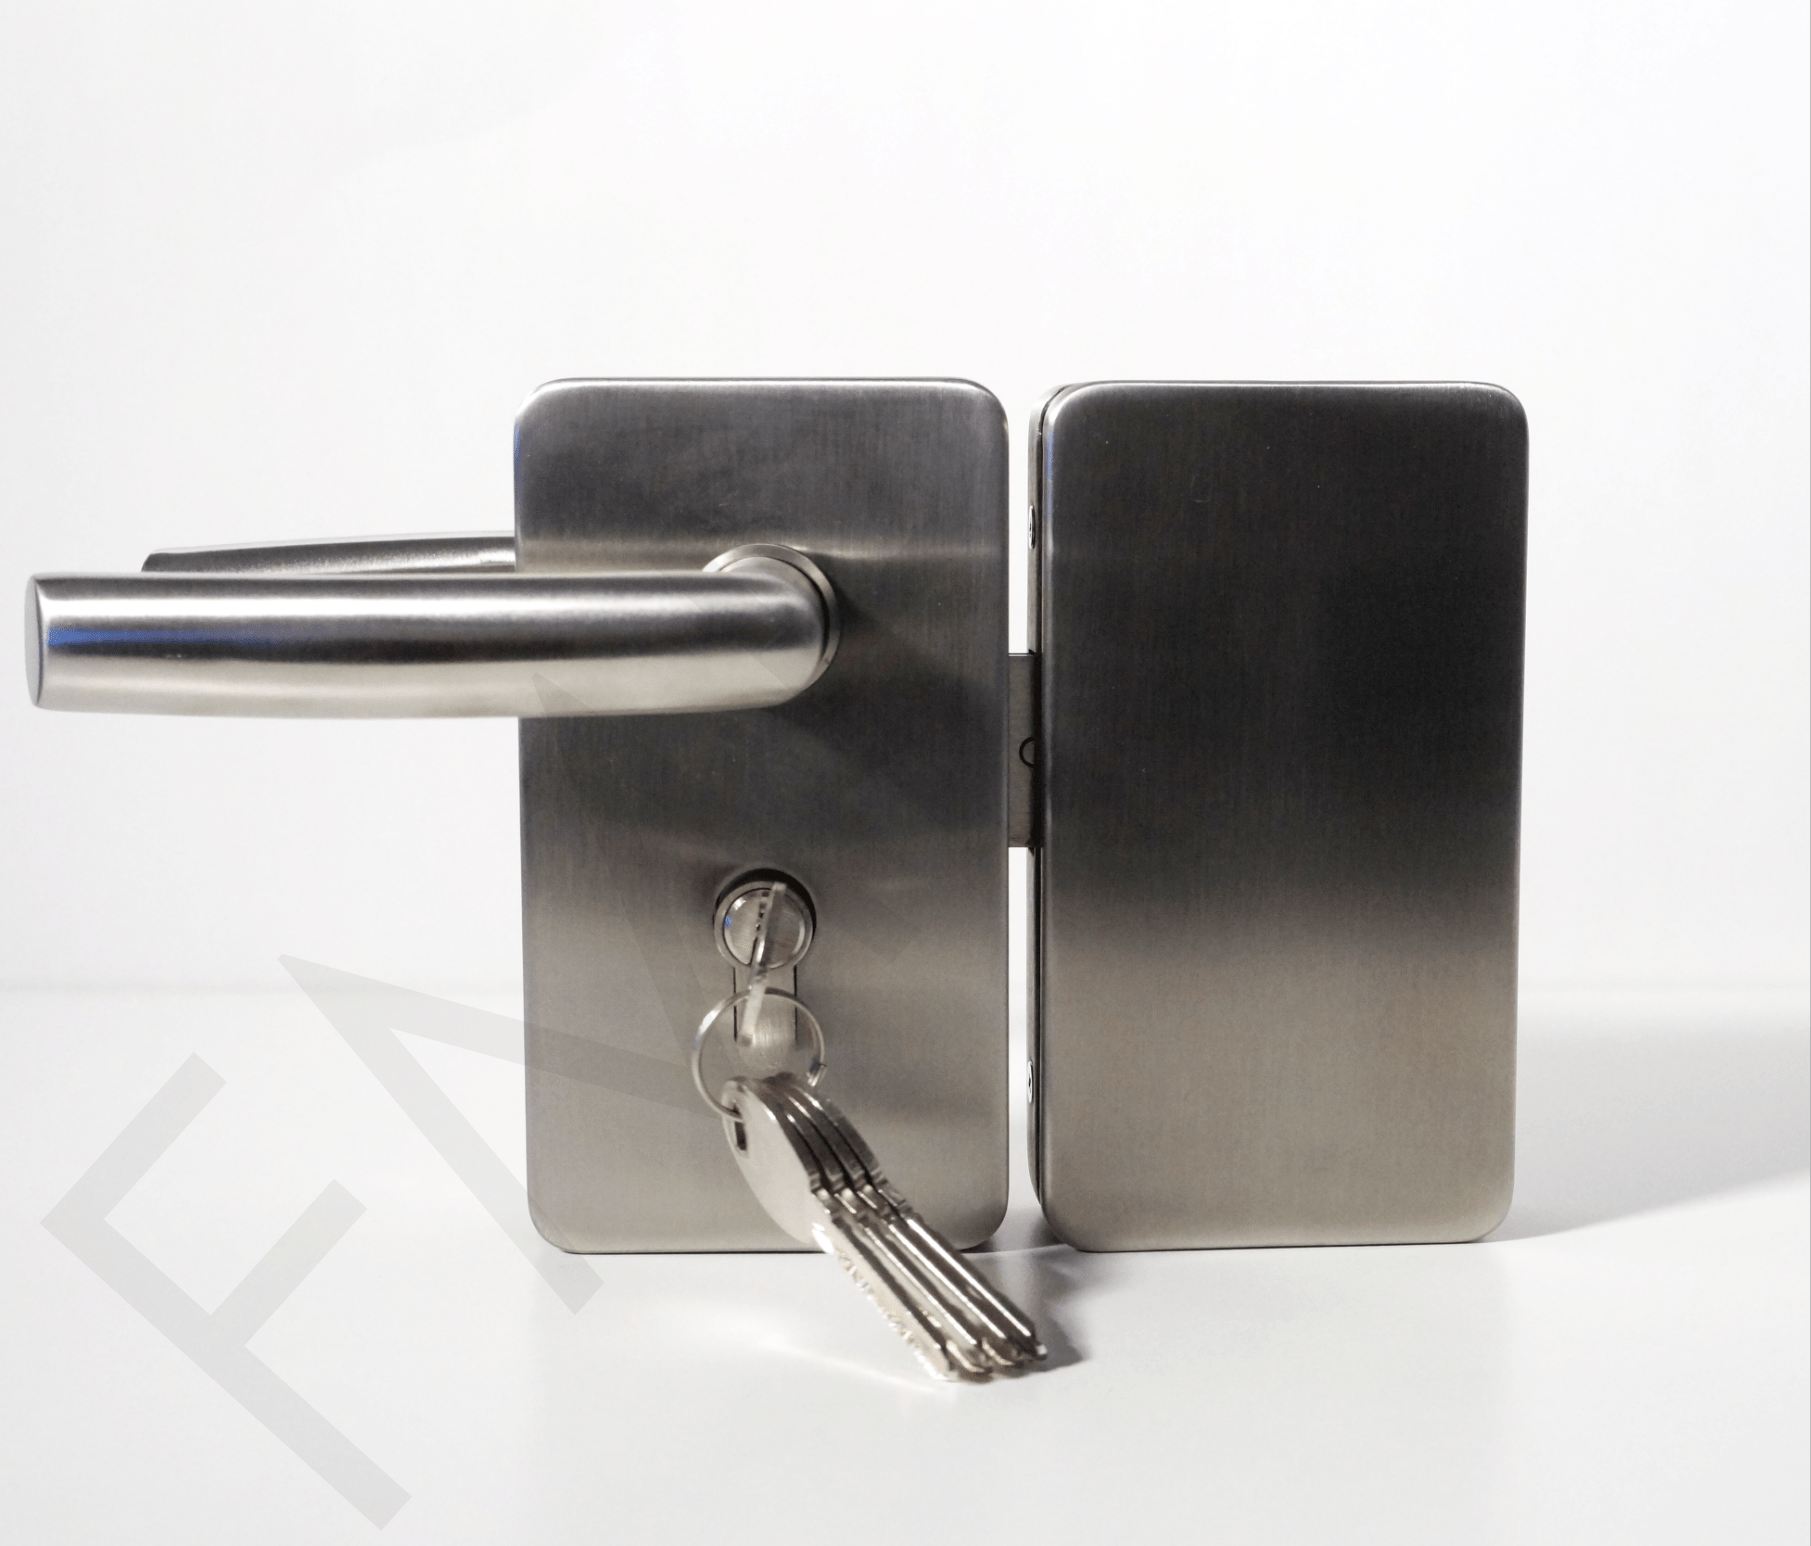 FMF 300 Series Glass-Glass Door Locks secure the glass doors with a solid handle. The rectangular-shaped commercial glass door locks are made of Aluminum with a coating of Stainless Steel. The neat rectangular shape with curved edges provides a sophisticated appearance to the overall theme around the glass doors. The 300 series is a great architectural feature for your main entry glass door, glass panel doors and modern glass doors around the commercial properties. The minimalistic design and unique finish complement any modern decoration. The fixed and solid handles are strong enough to pull and push them multiple times for several years.